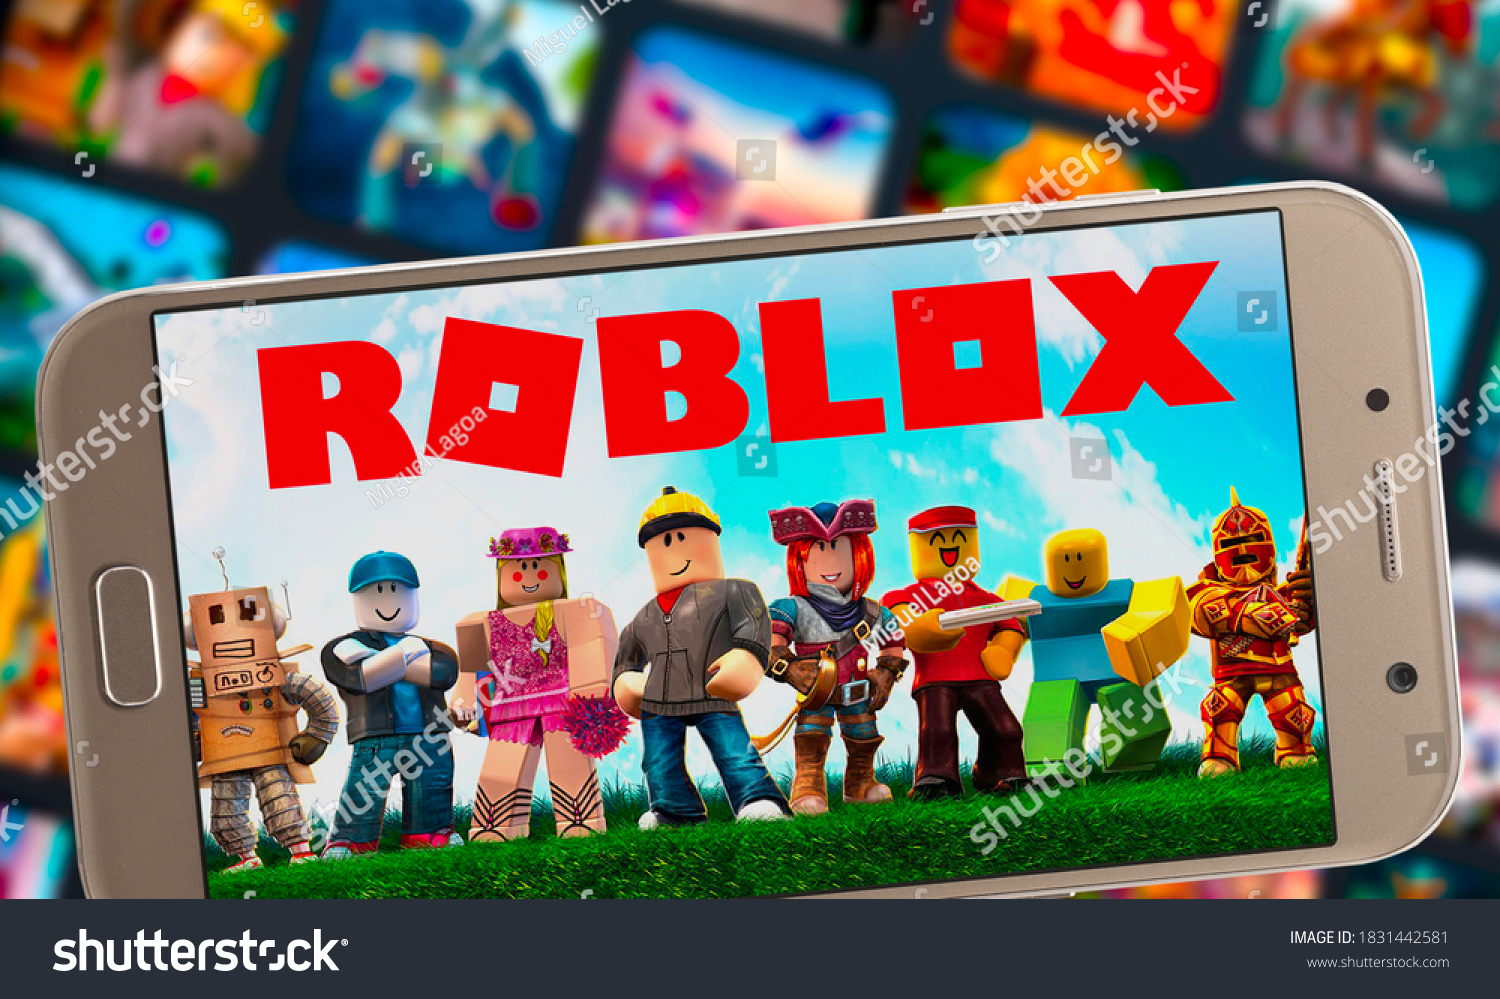 Roblox Notebook Screen Sao Paulo Brazil Stock Photo Edit Now 1831442581 - roblox multiplayer online game